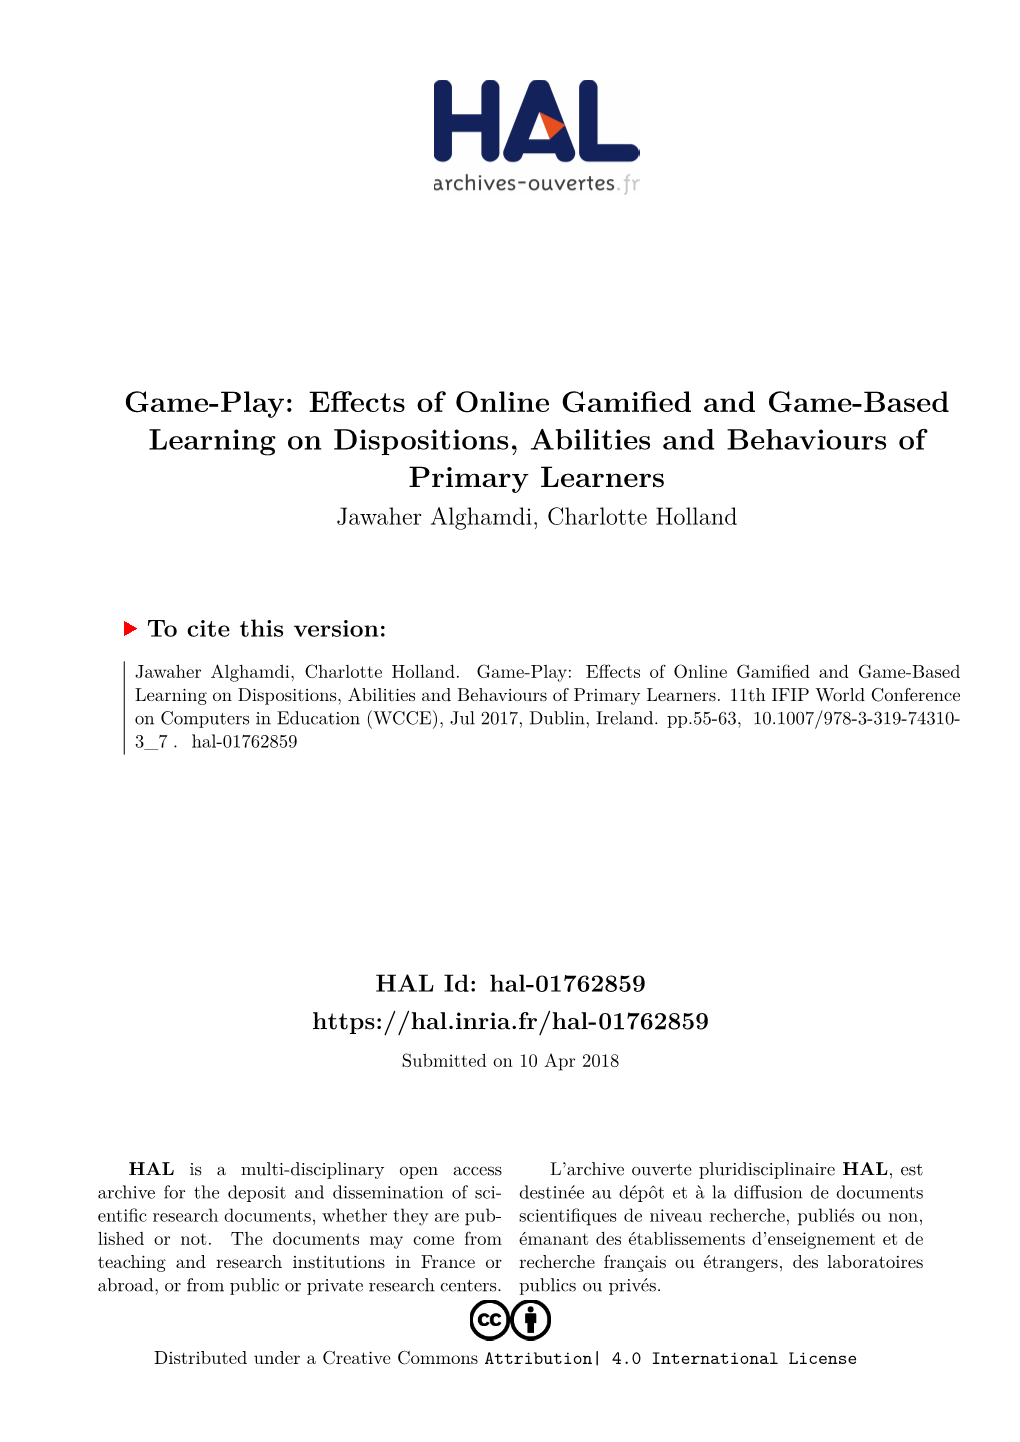 Effects of Online Gamified and Game-Based Learning on Dispositions, Abilities and Behaviours of Primary Learners Jawaher Alghamdi, Charlotte Holland